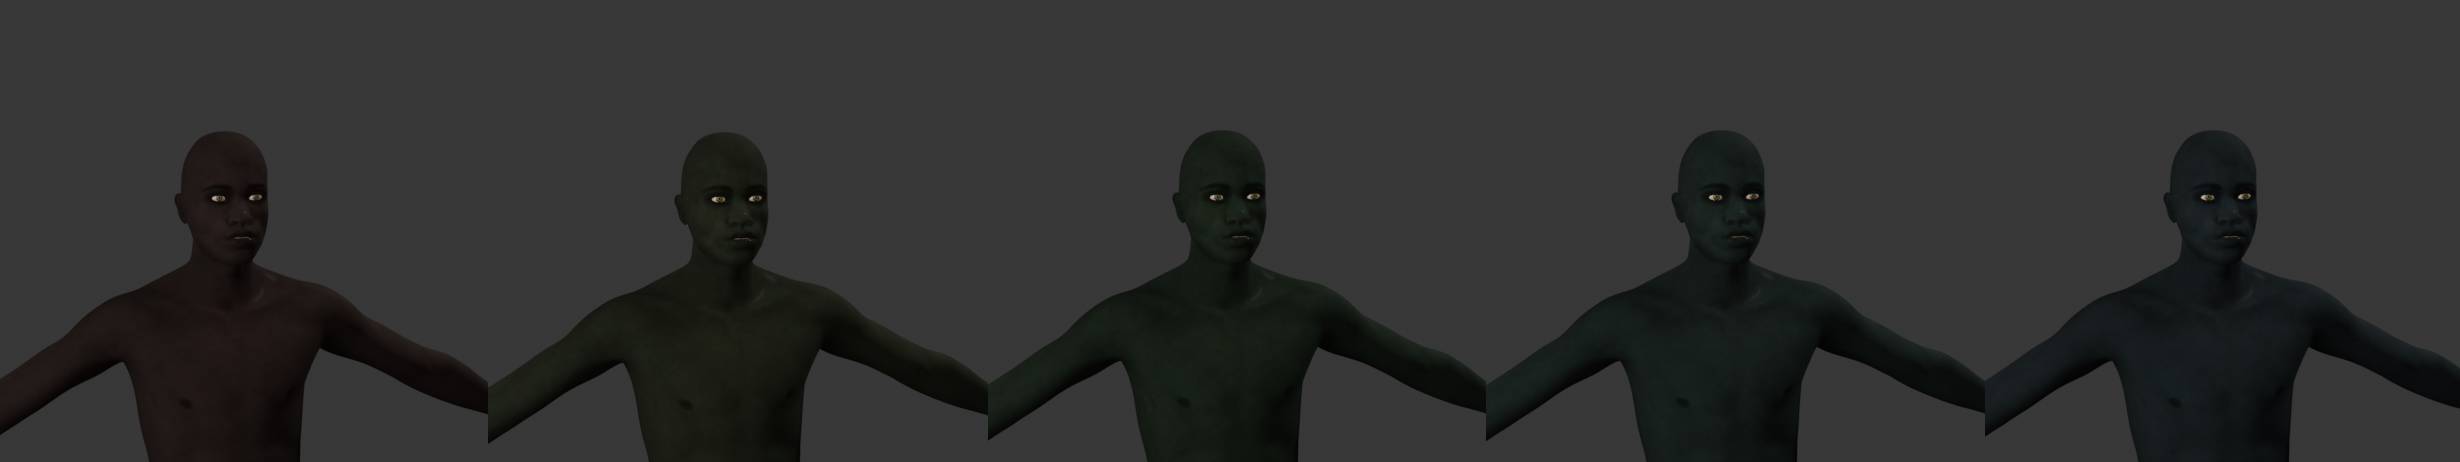 _images/skin_hues_example01.png